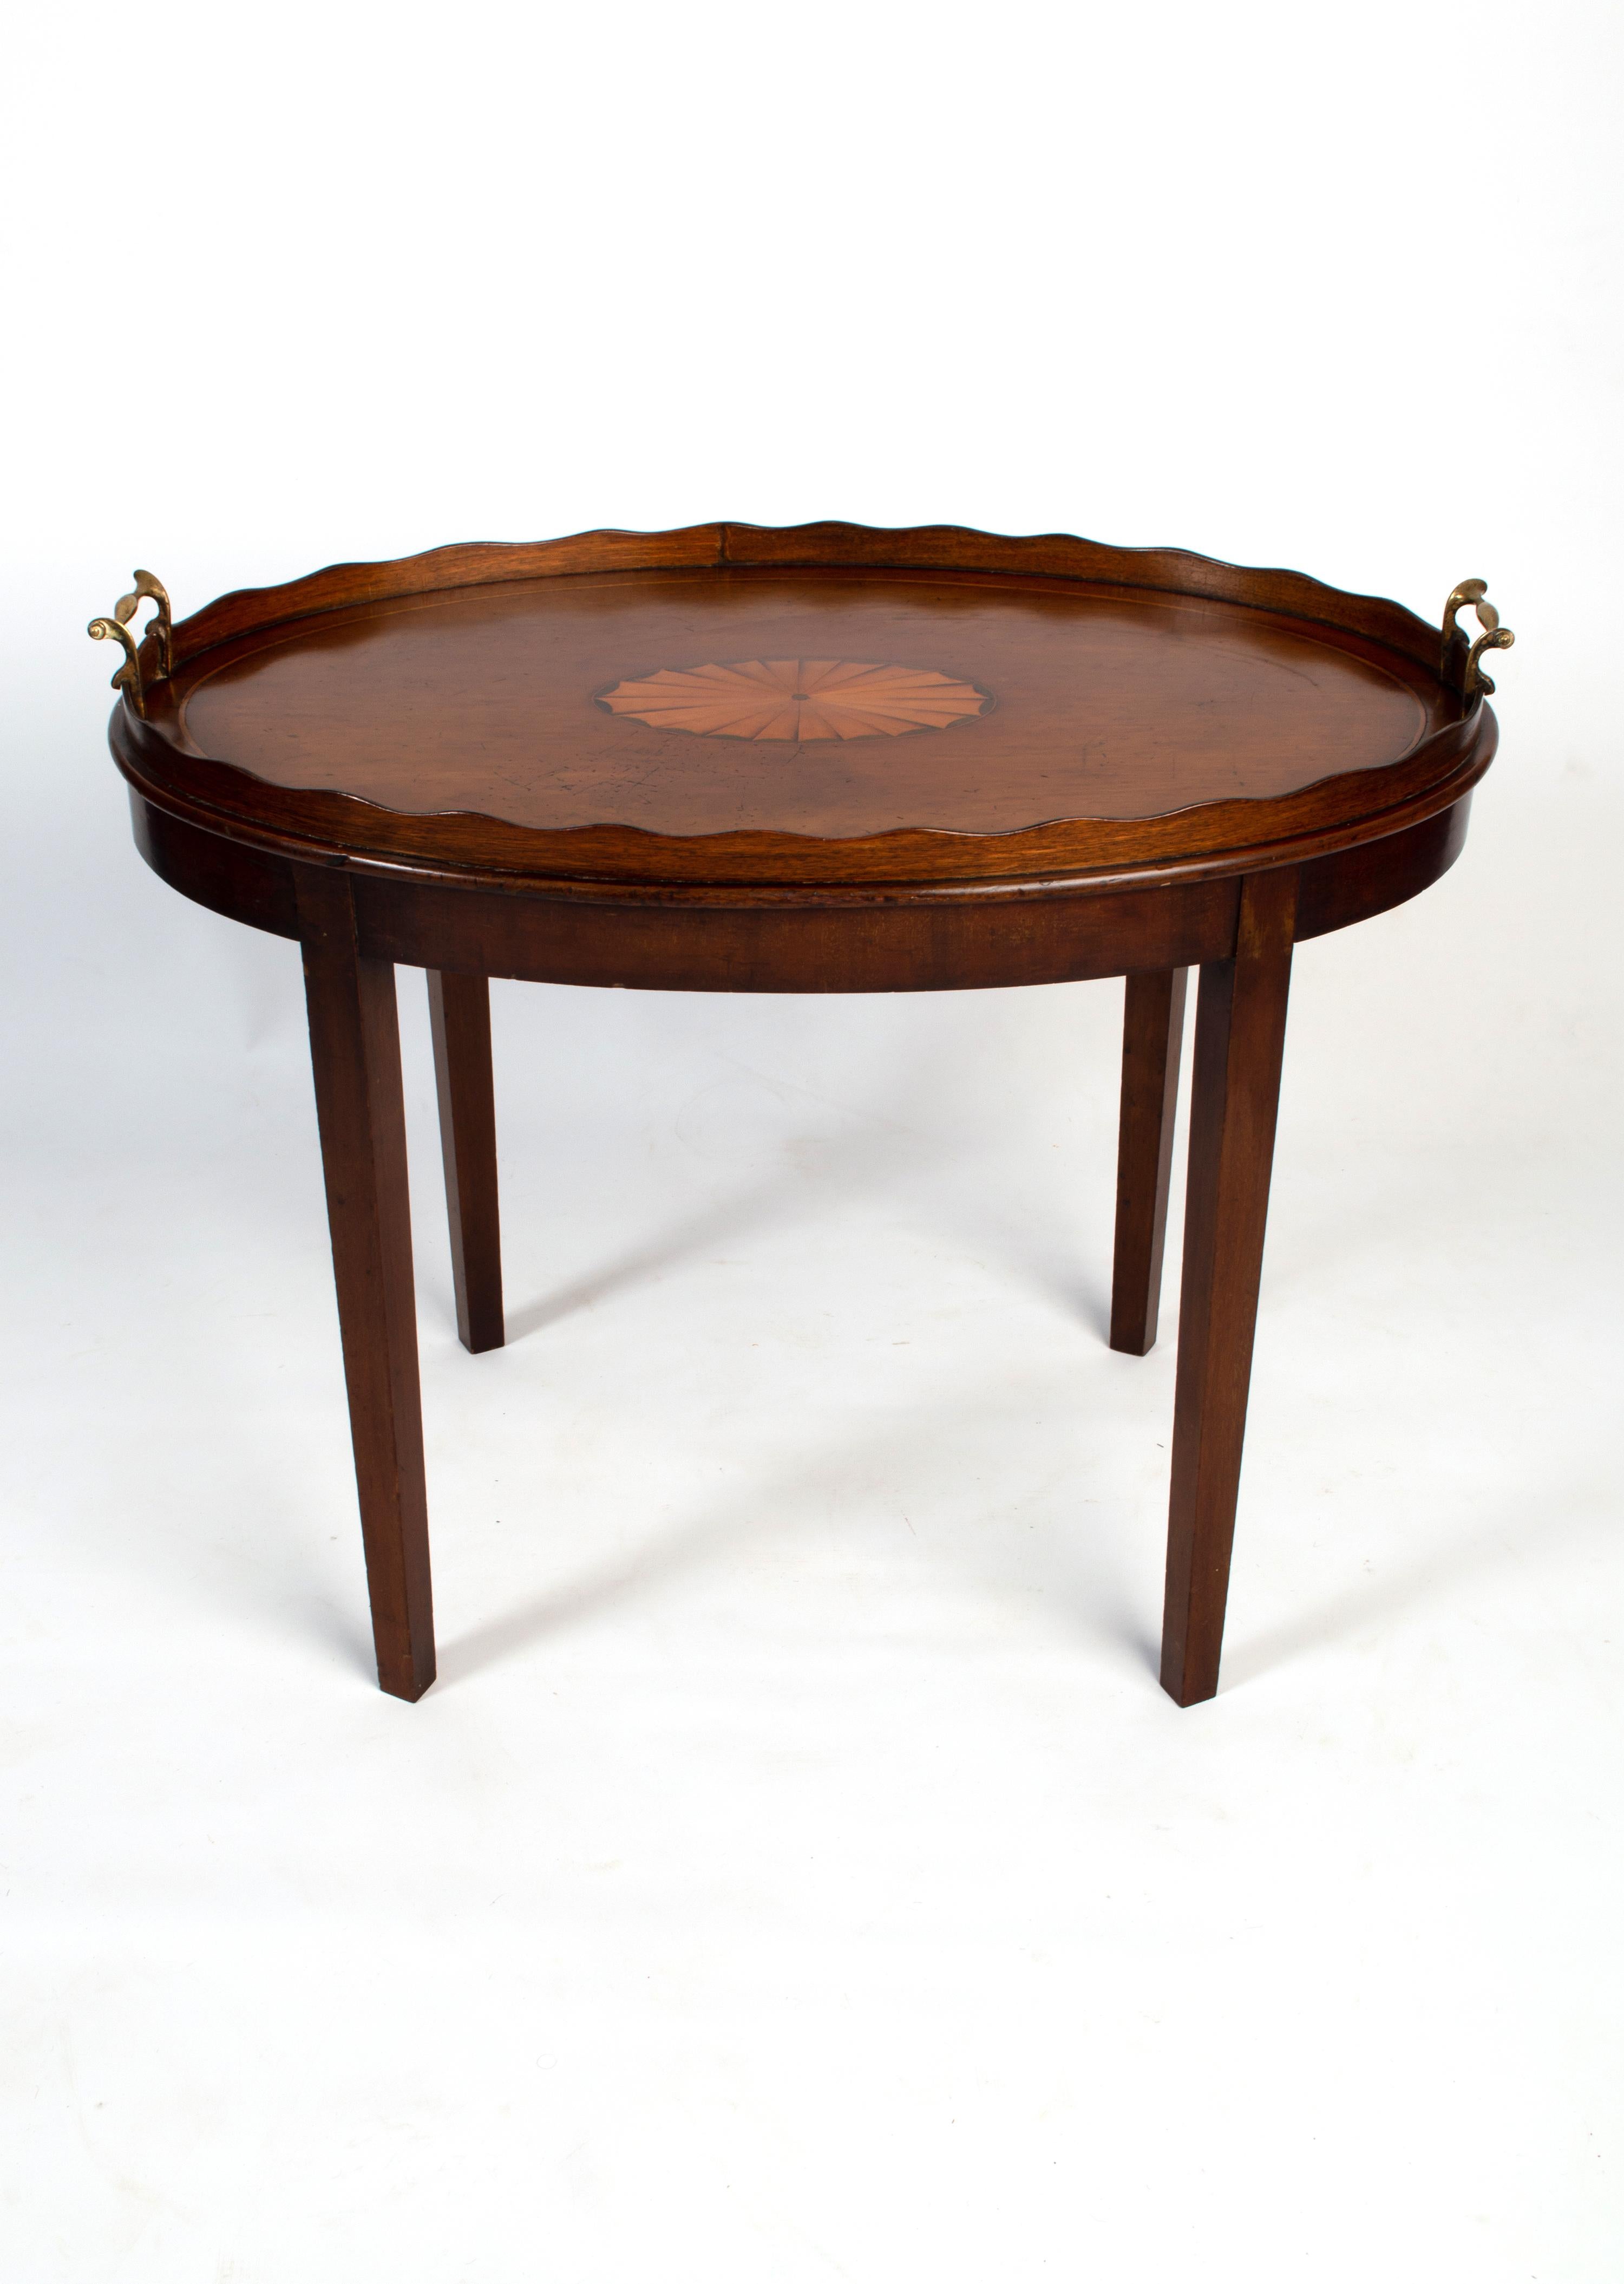 Antique English 19th century Sheraton Revival Mahogany Tray Table.
circa 1890.

In very good condition commensurate with age.